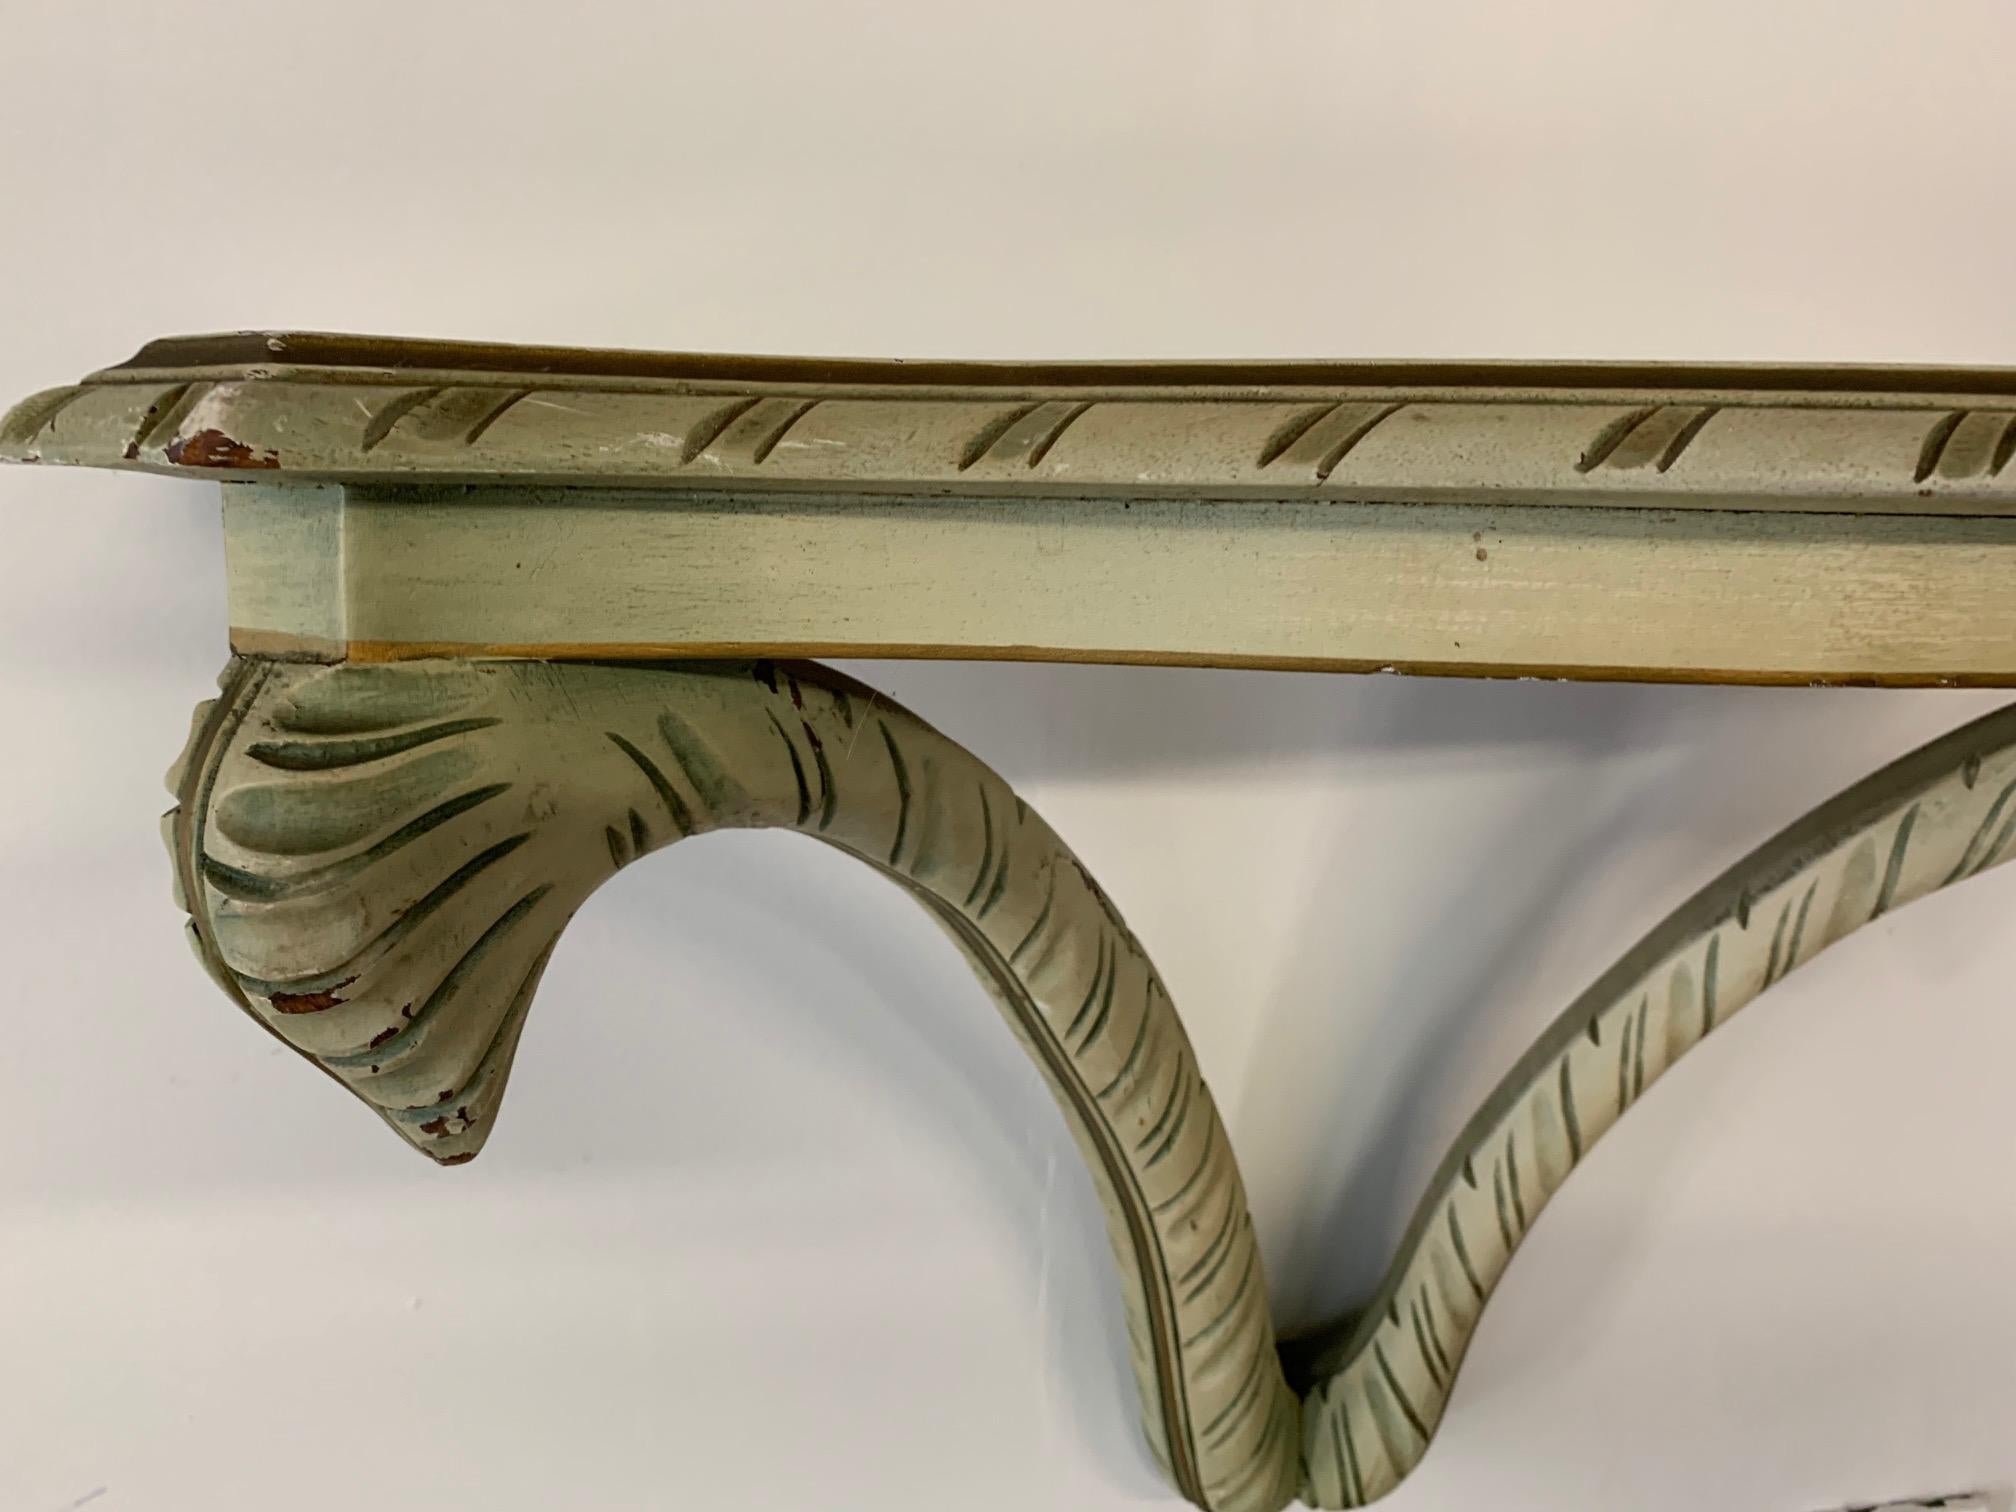 Decorative wall shelf in the manner of Dorothy Draper features carved acanthus leaf detailing and is in very good vintage condition with minor imperfections consistent with age.